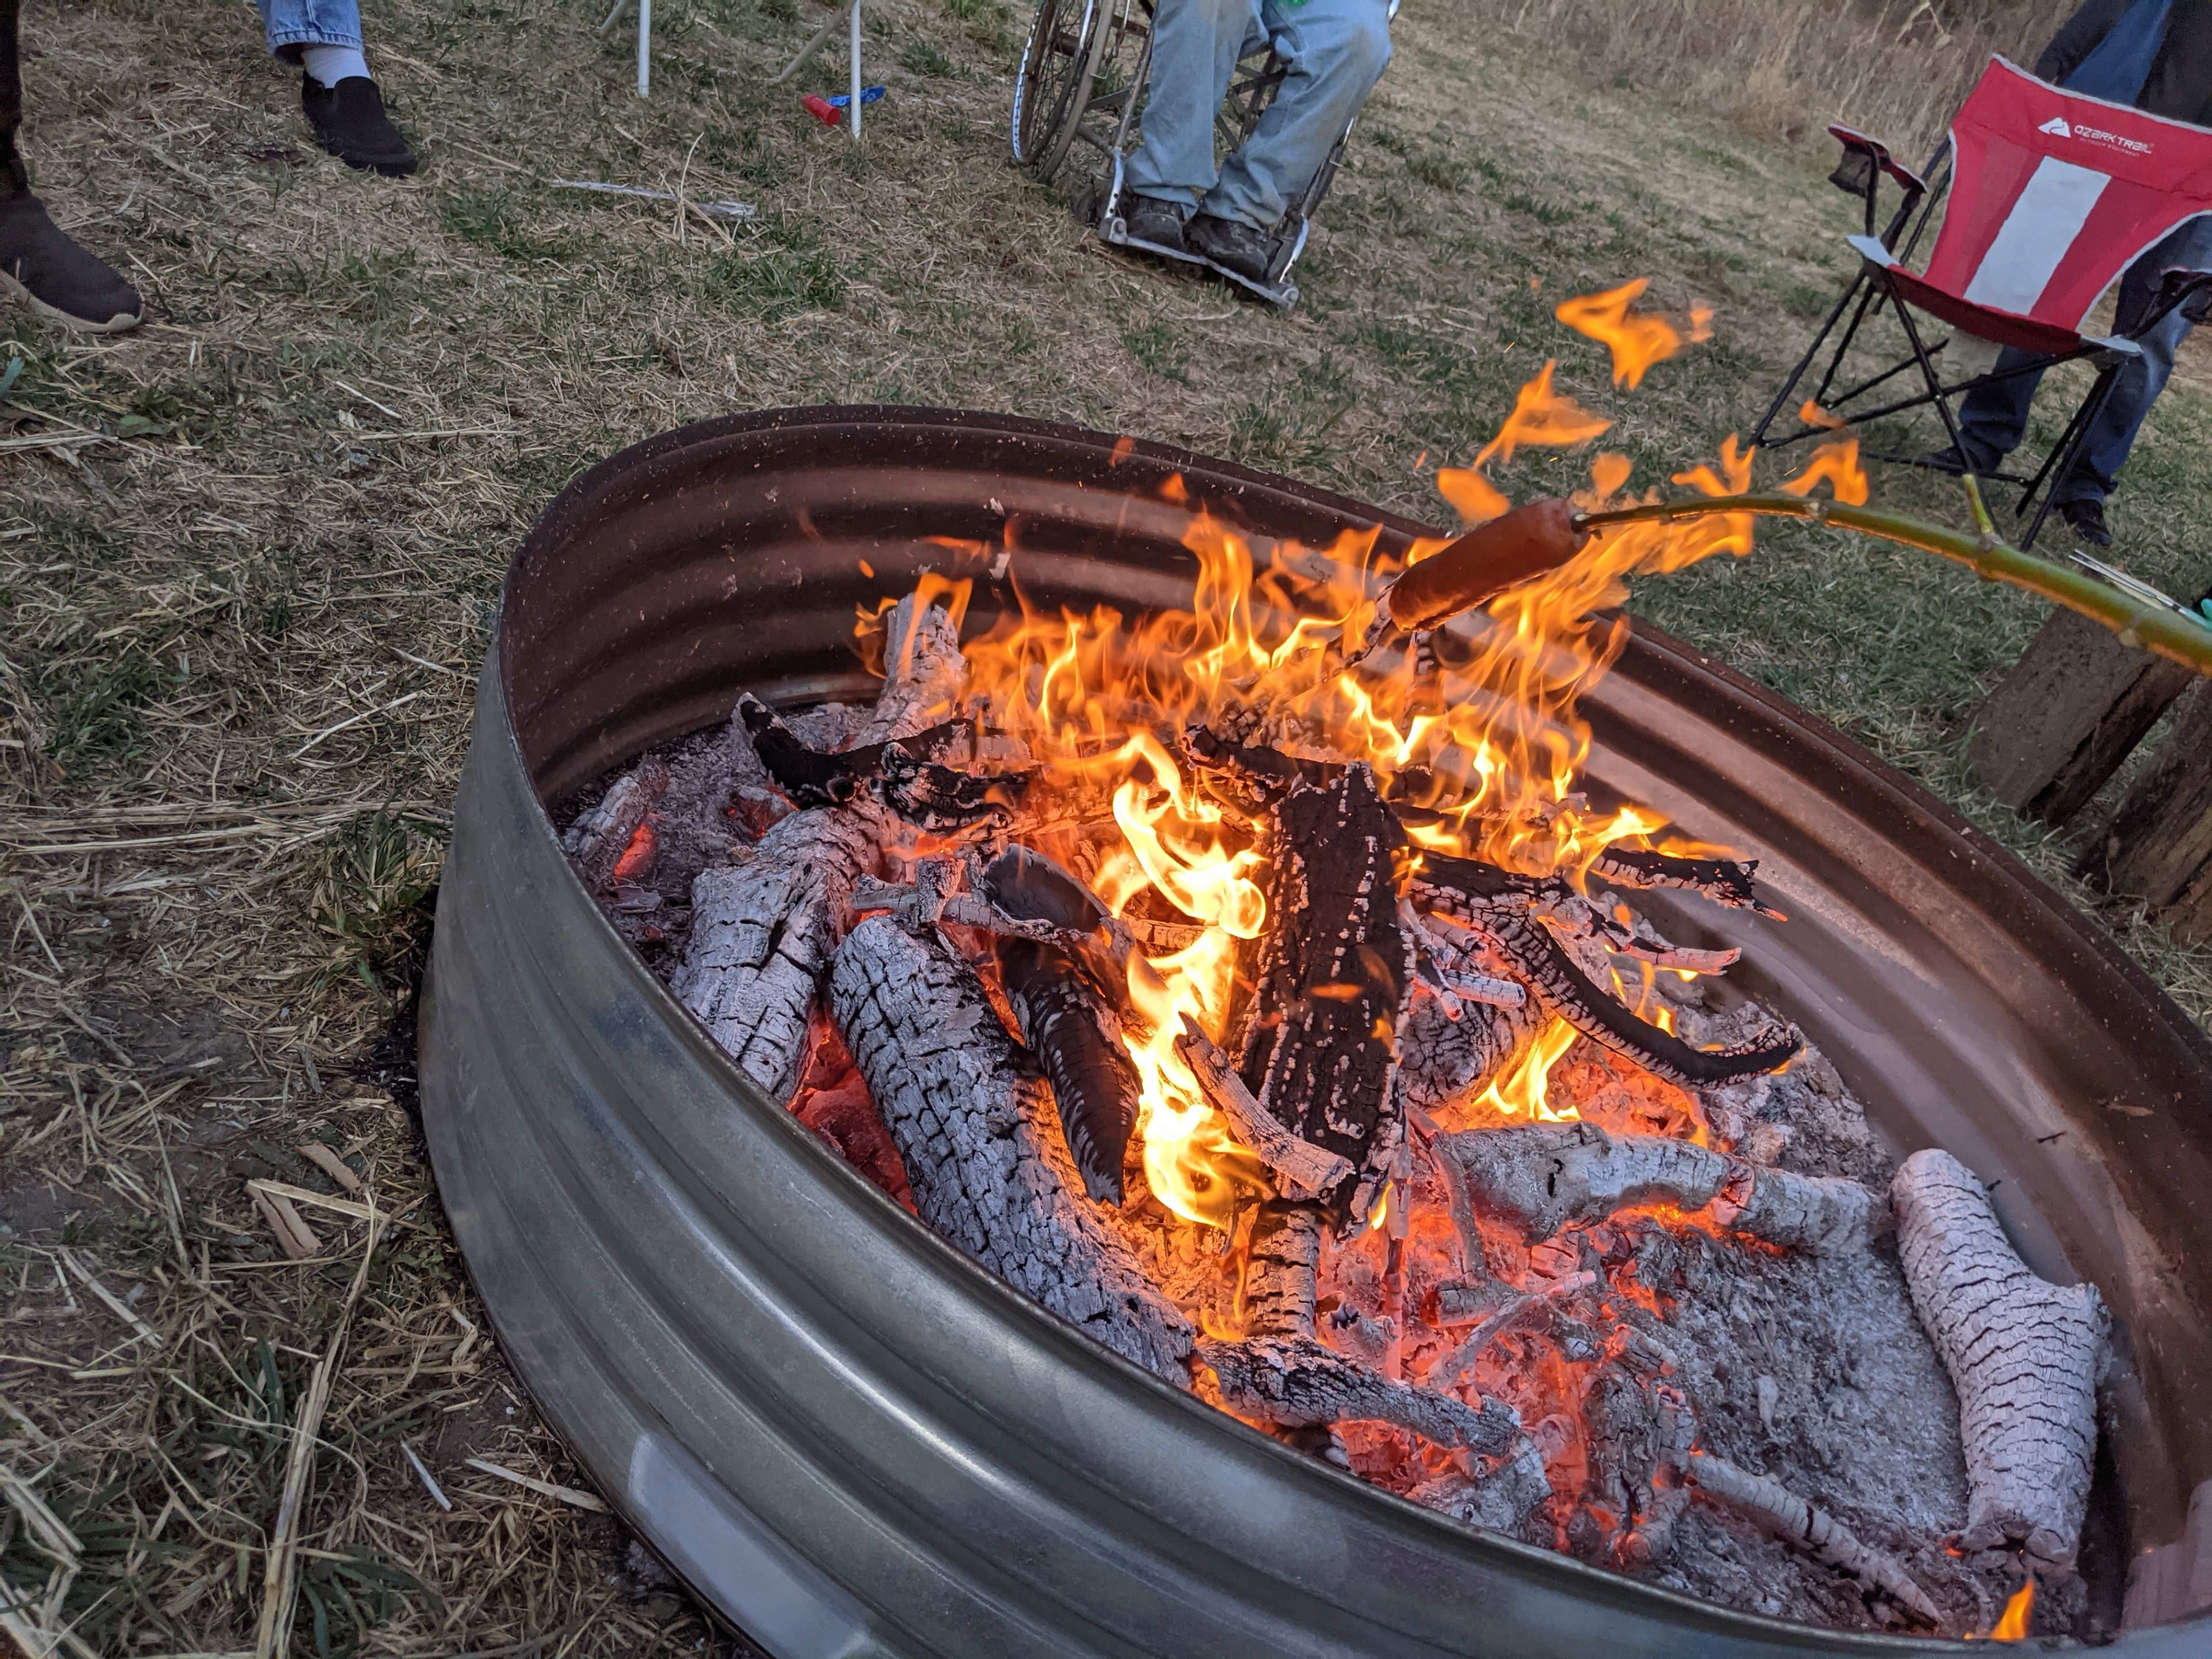 Nothing beats an evening with friends around a fire!